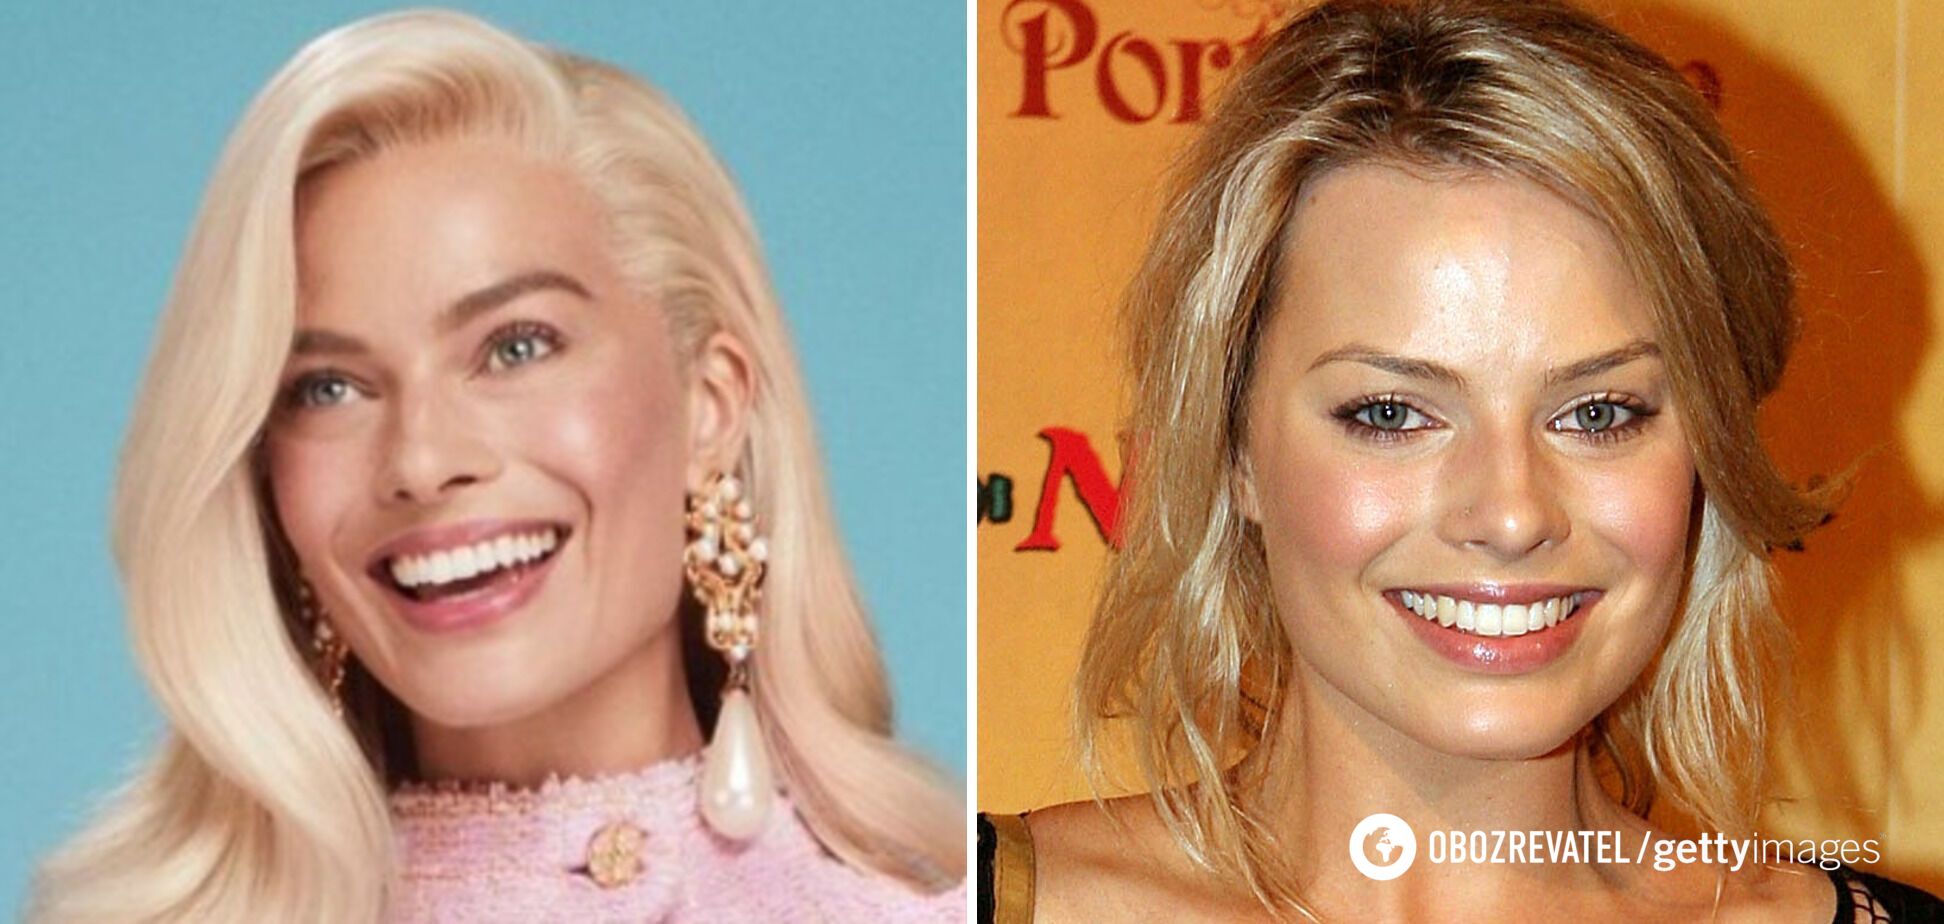 Nose, eyes, chin altered: expert reveals how Margot Robbie 'reshaped' her face before 'Barbie' shoot. Photo comparison